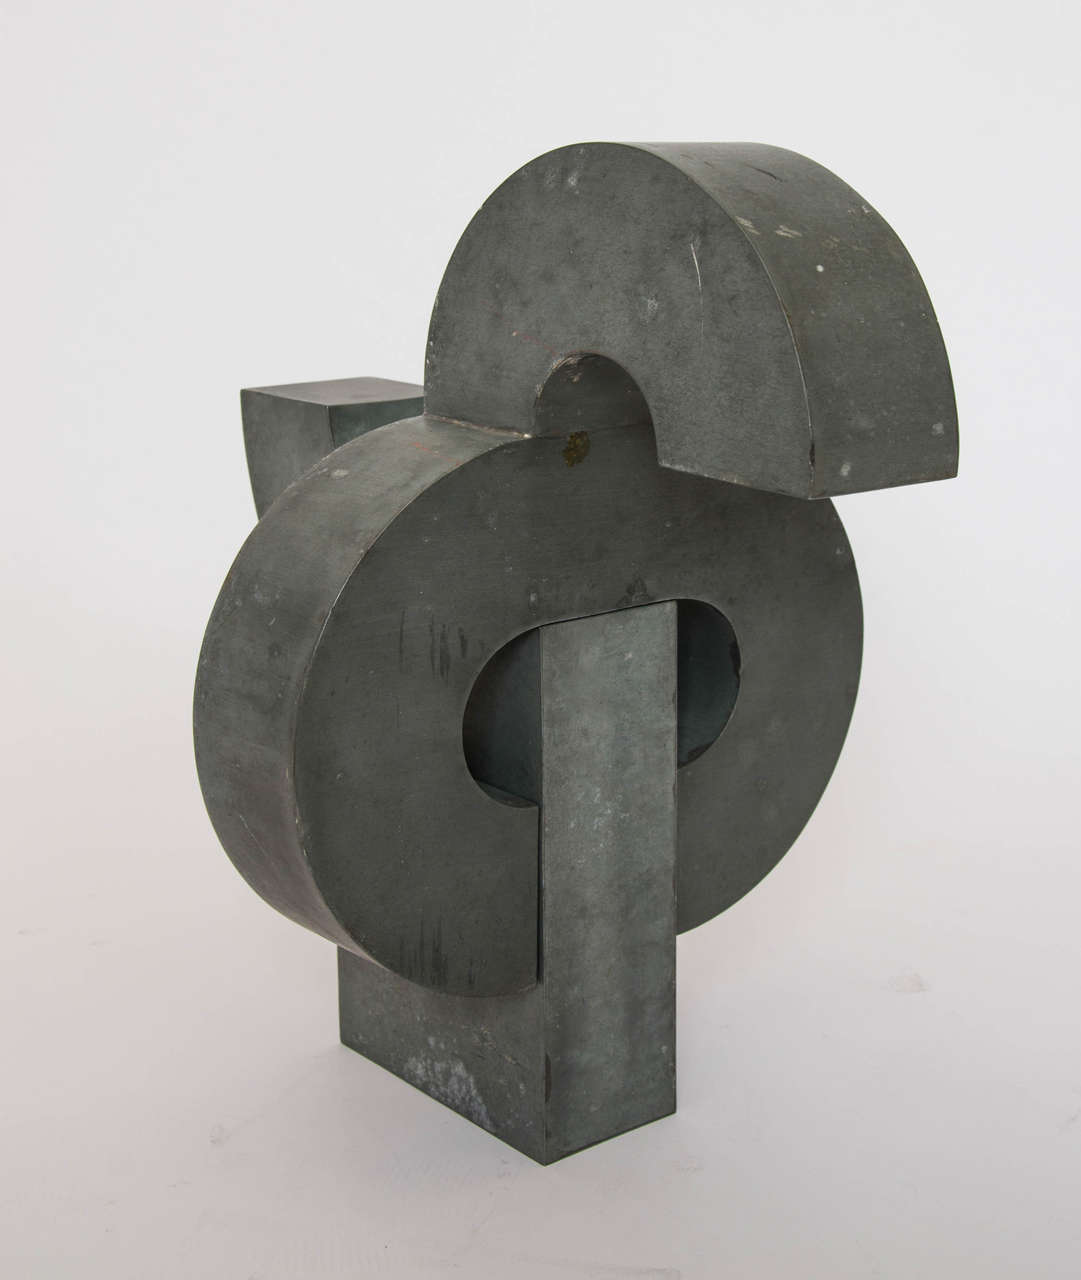 Geometric sculpture welded in zinc sheet metal. This sculpture is cleverly constructed in two parts giving the appearance of interlocking forms which can take different shapes by changing position.